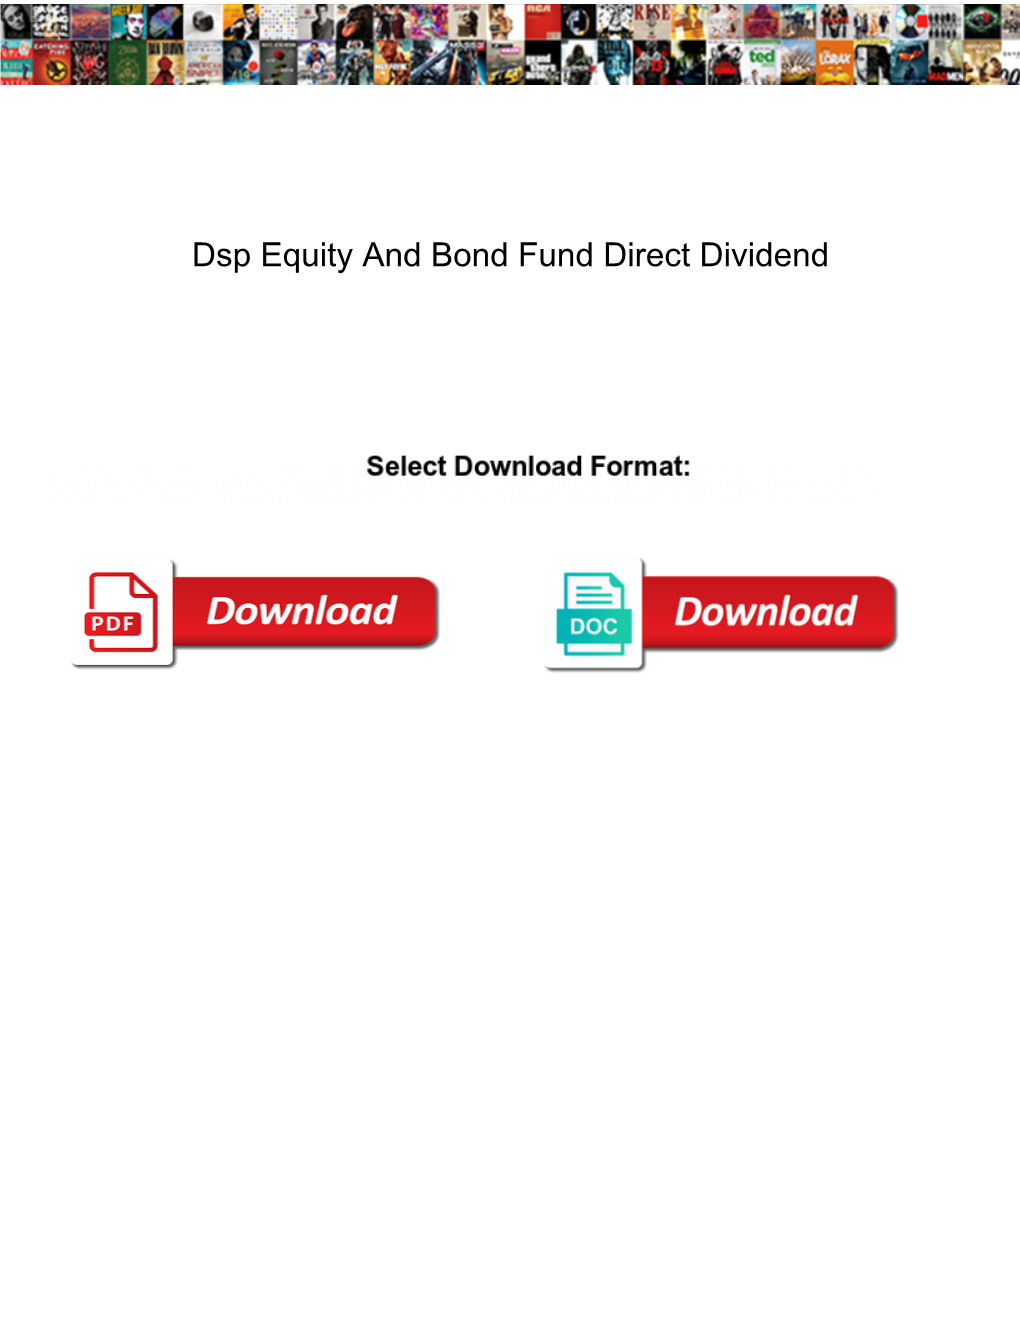 Dsp Equity and Bond Fund Direct Dividend